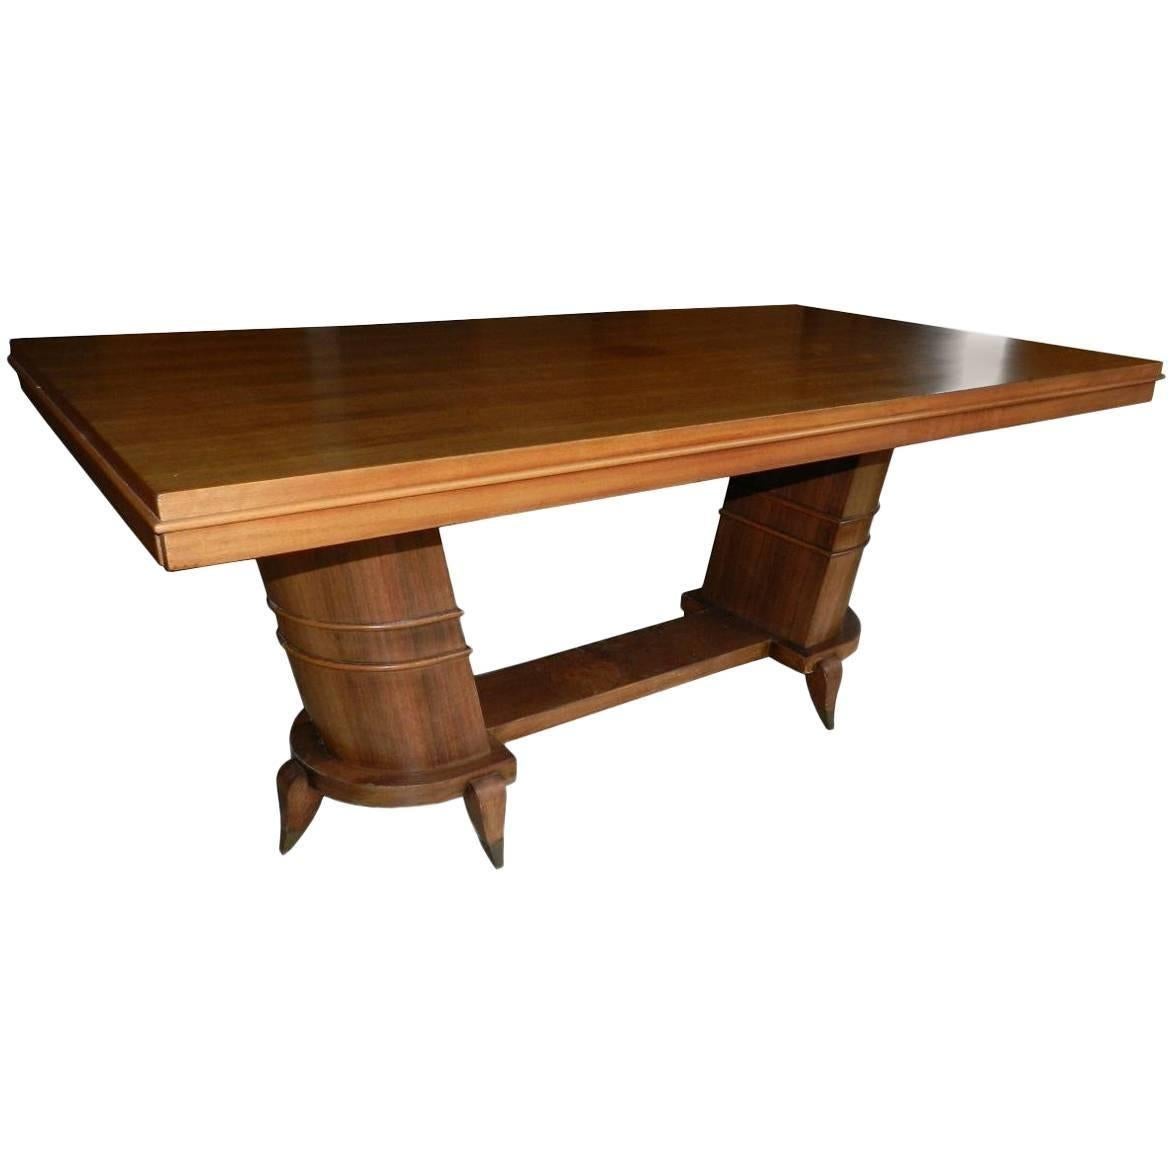 Art Deco table in palissander, circa 1930
With two leaves.